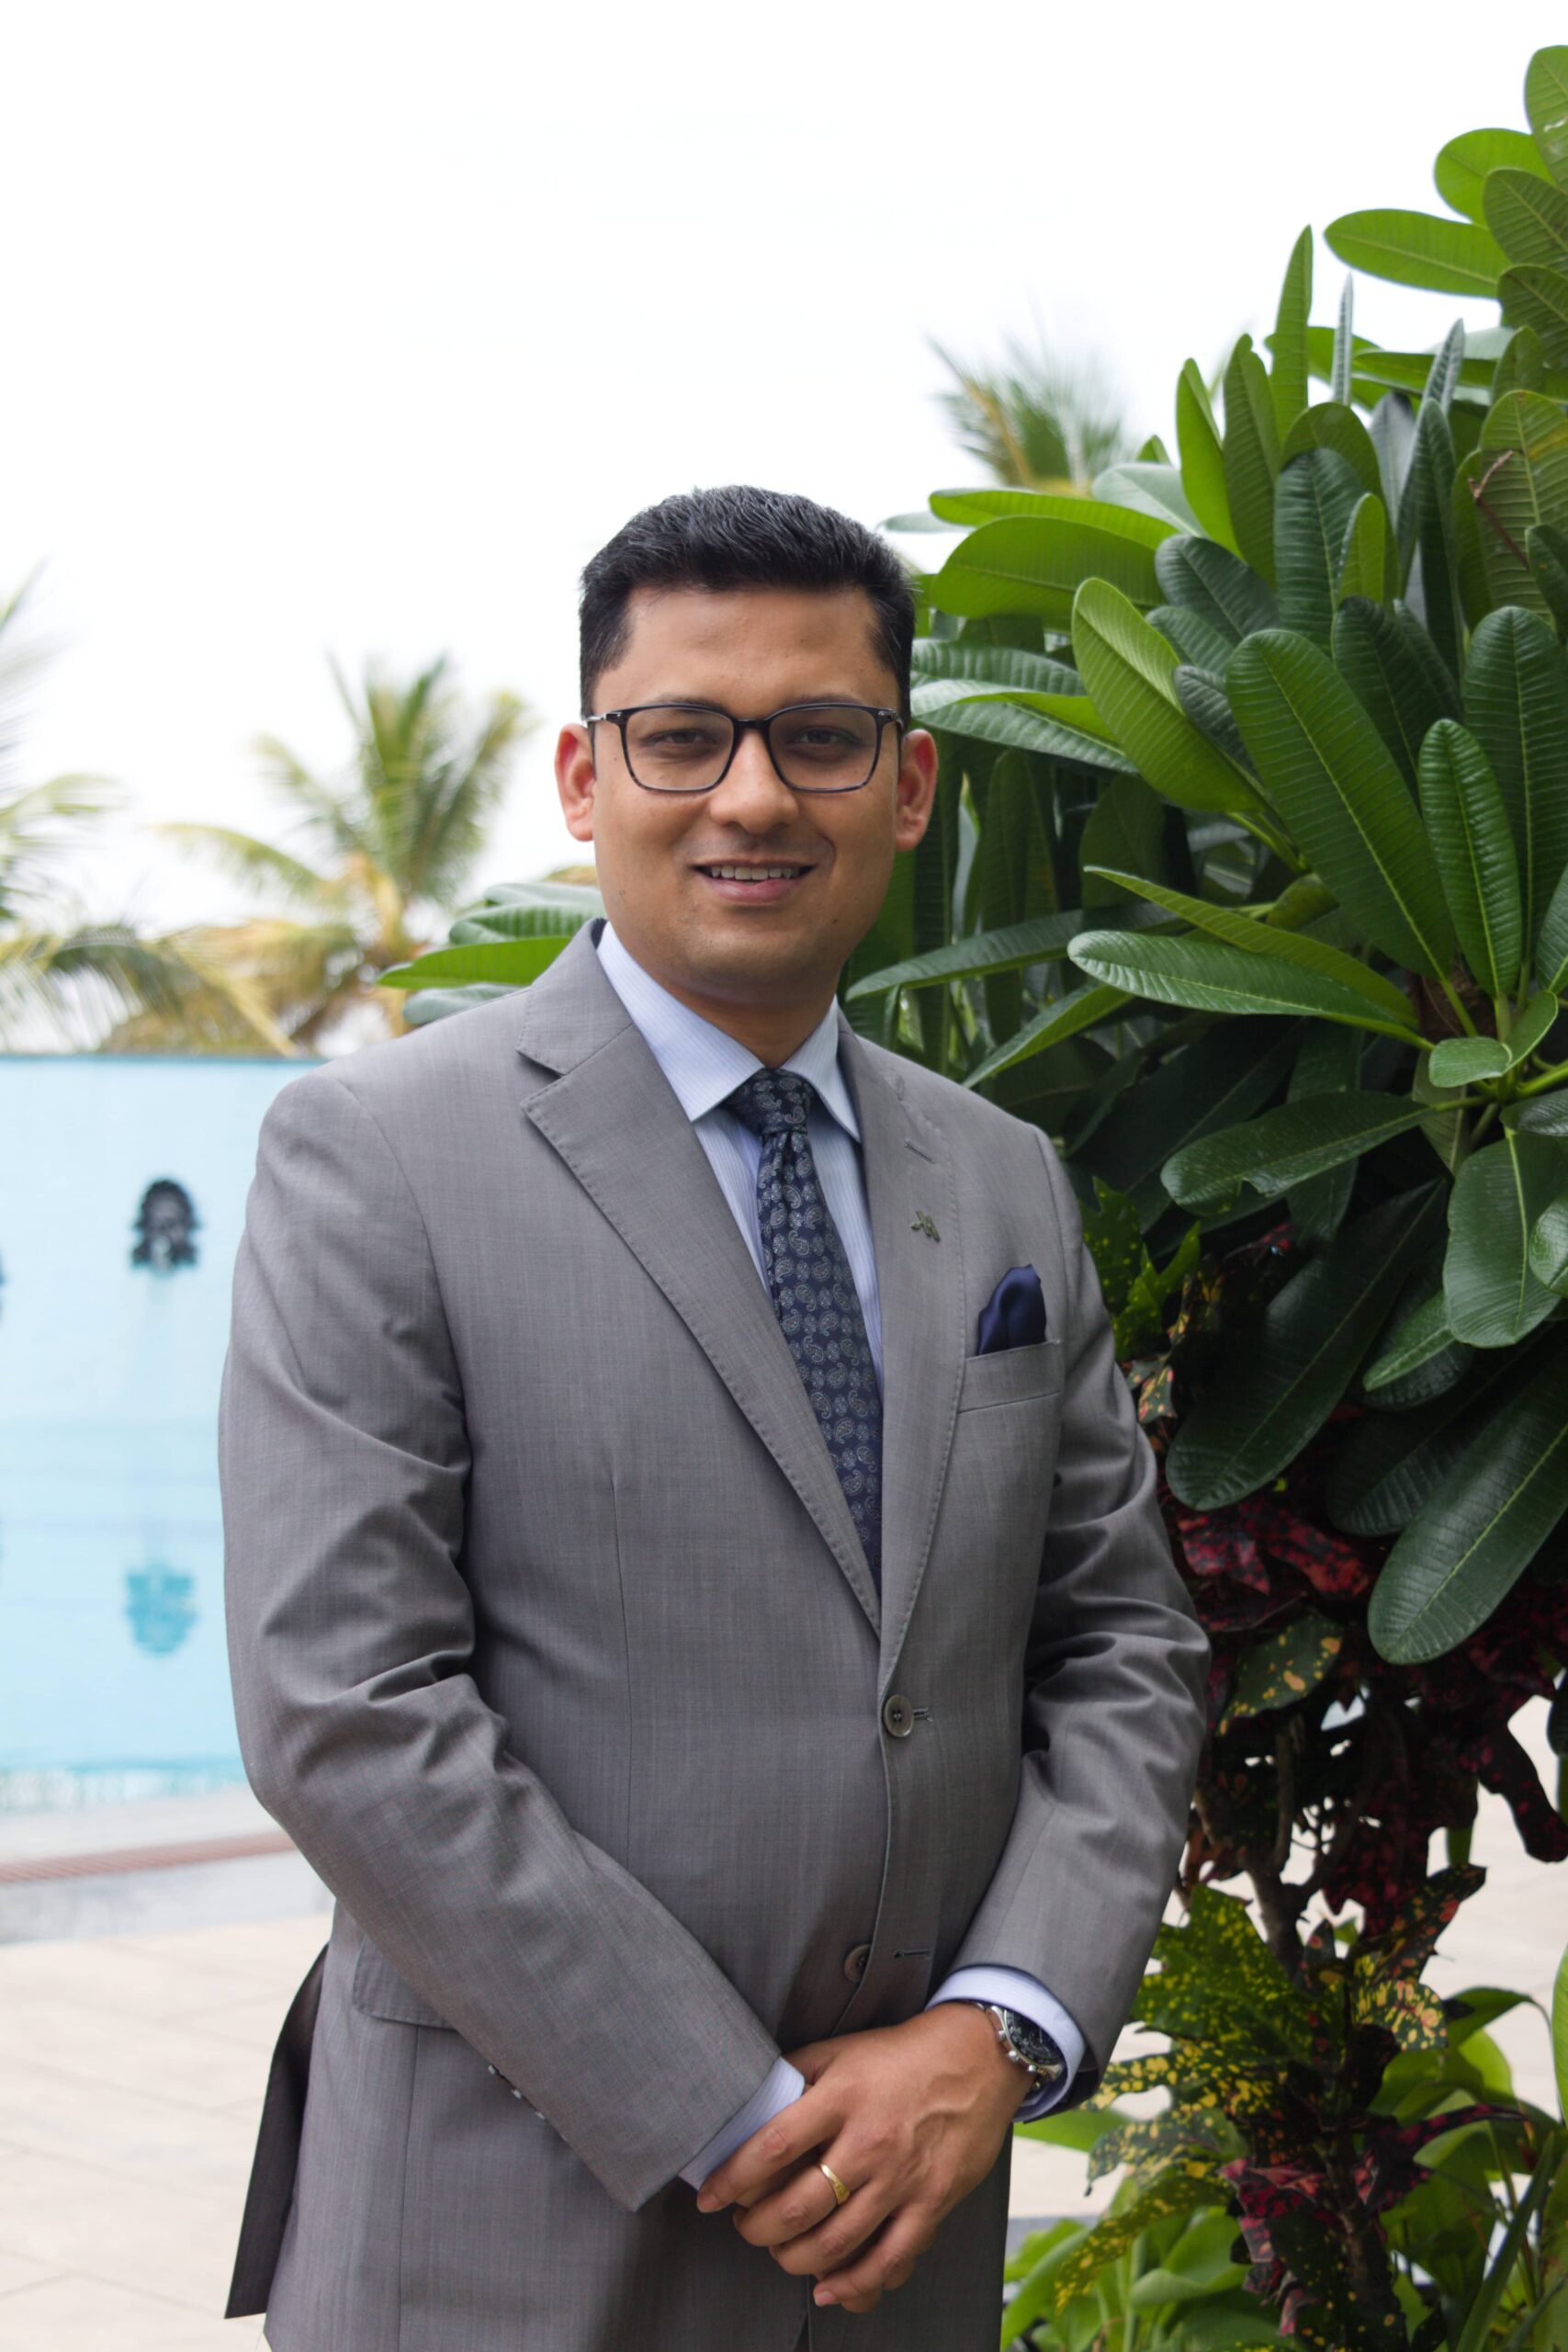 Somrup Chanda takes over as the Director of Operations, Bengaluru Marriott Hotel Whitefield